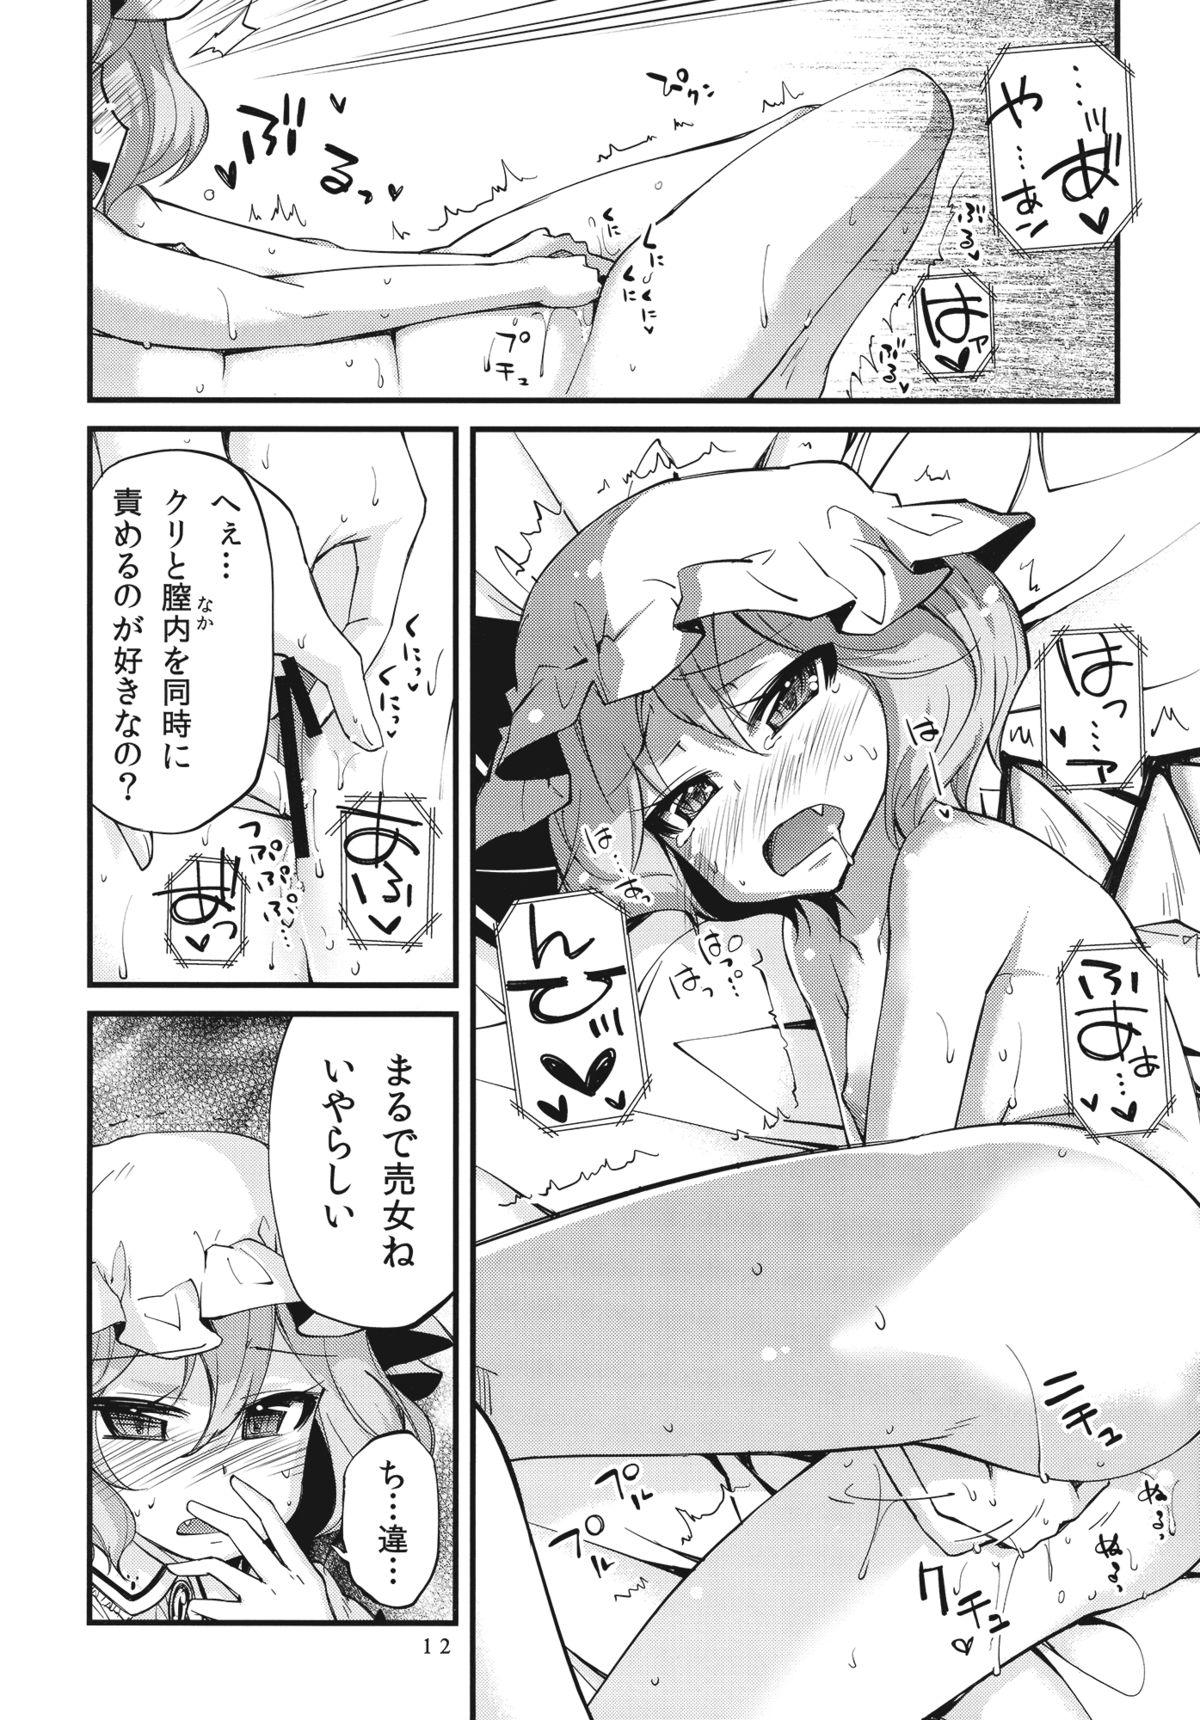 Passion .REC - Touhou project Sloppy Blowjob - Page 12